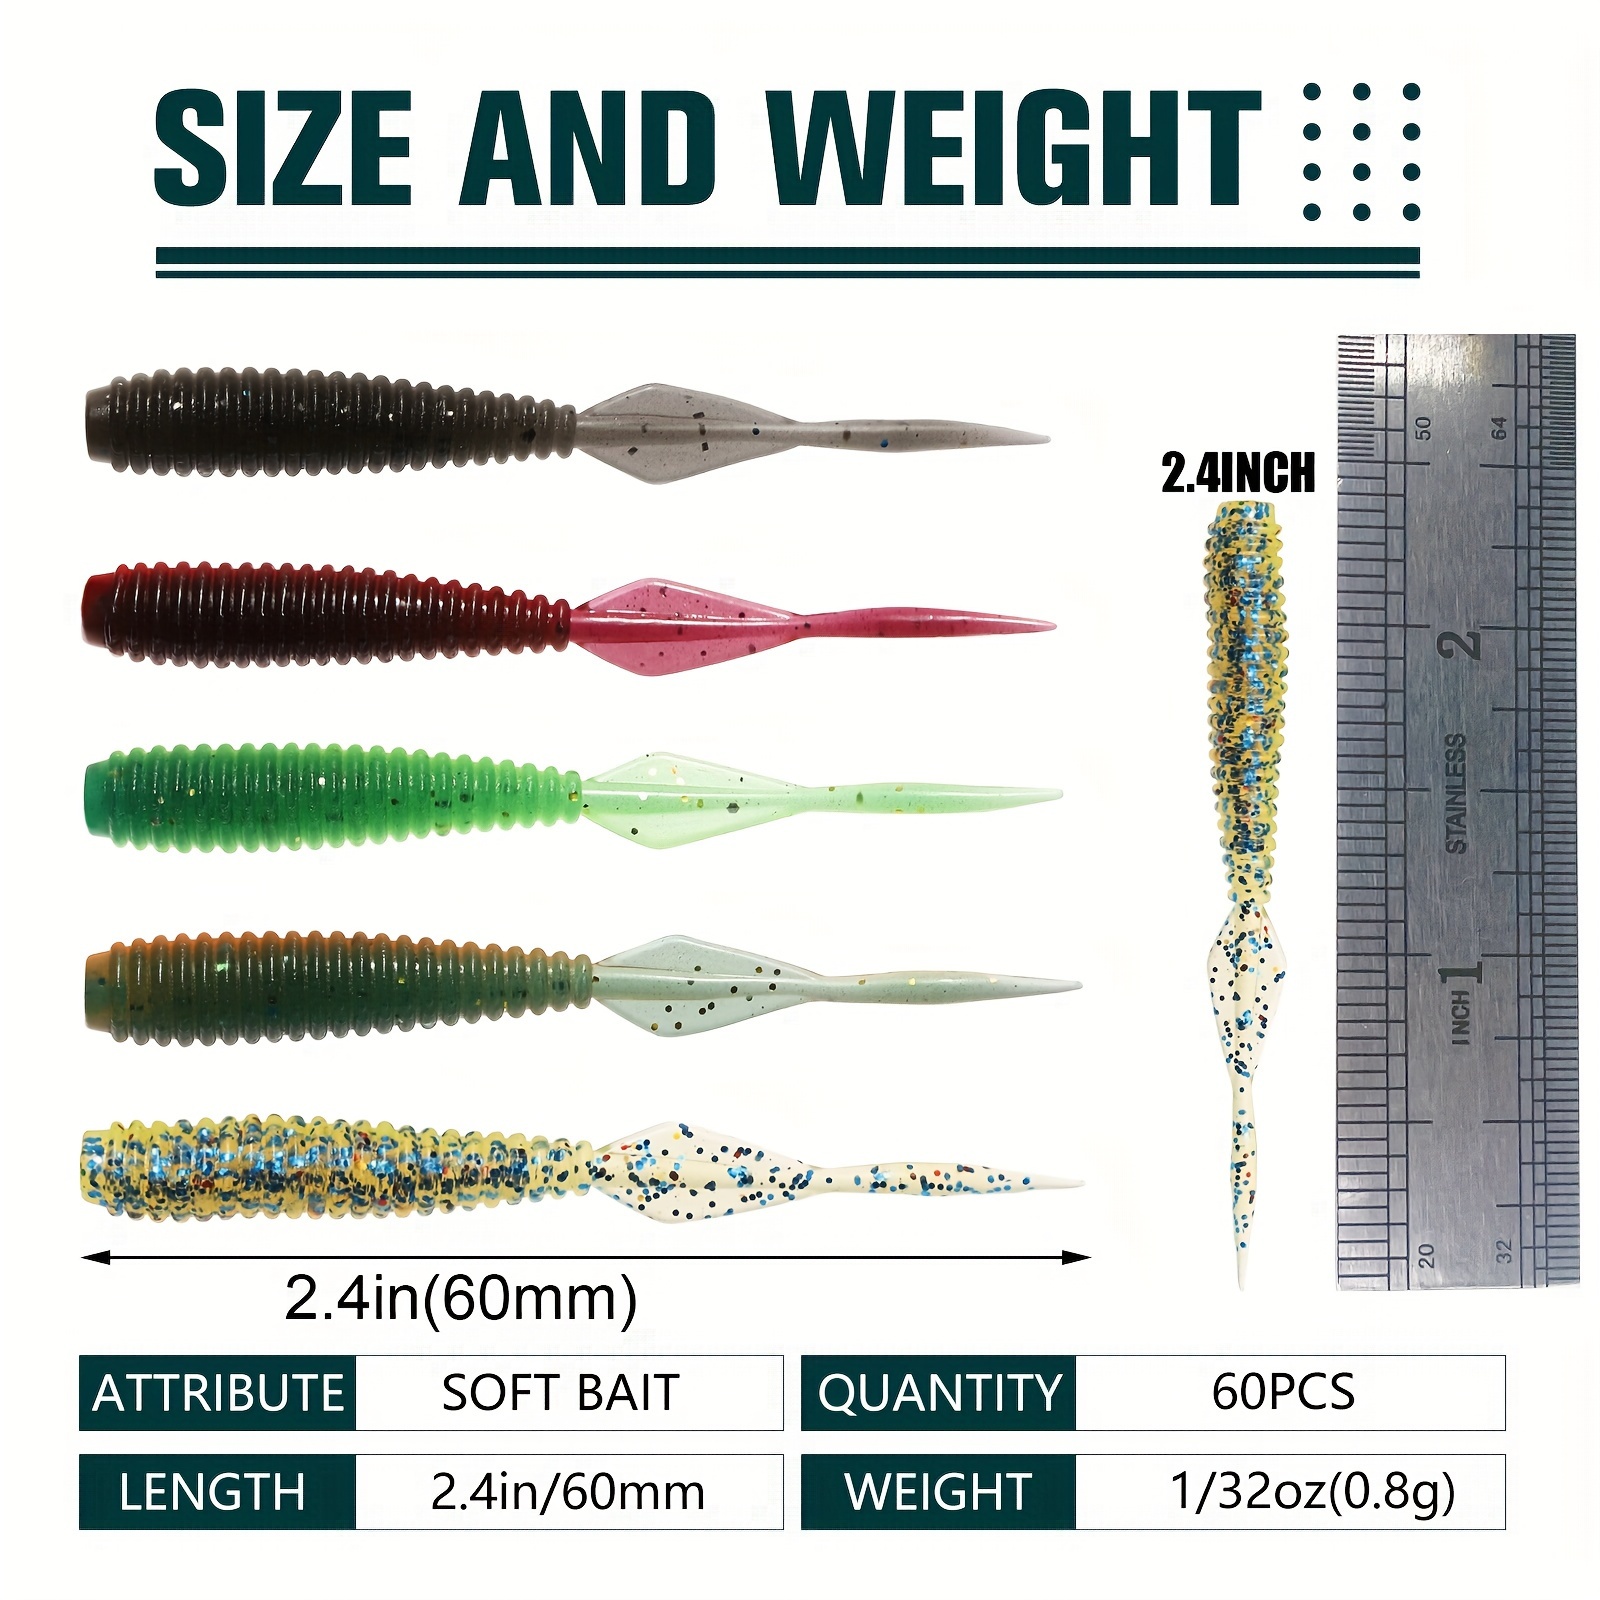 * 60pcs/box Bass Lure Kit, Fishing Soft Plastic Lure For Crappie Walleye  Trout, Fishing Baits With Tackle Box